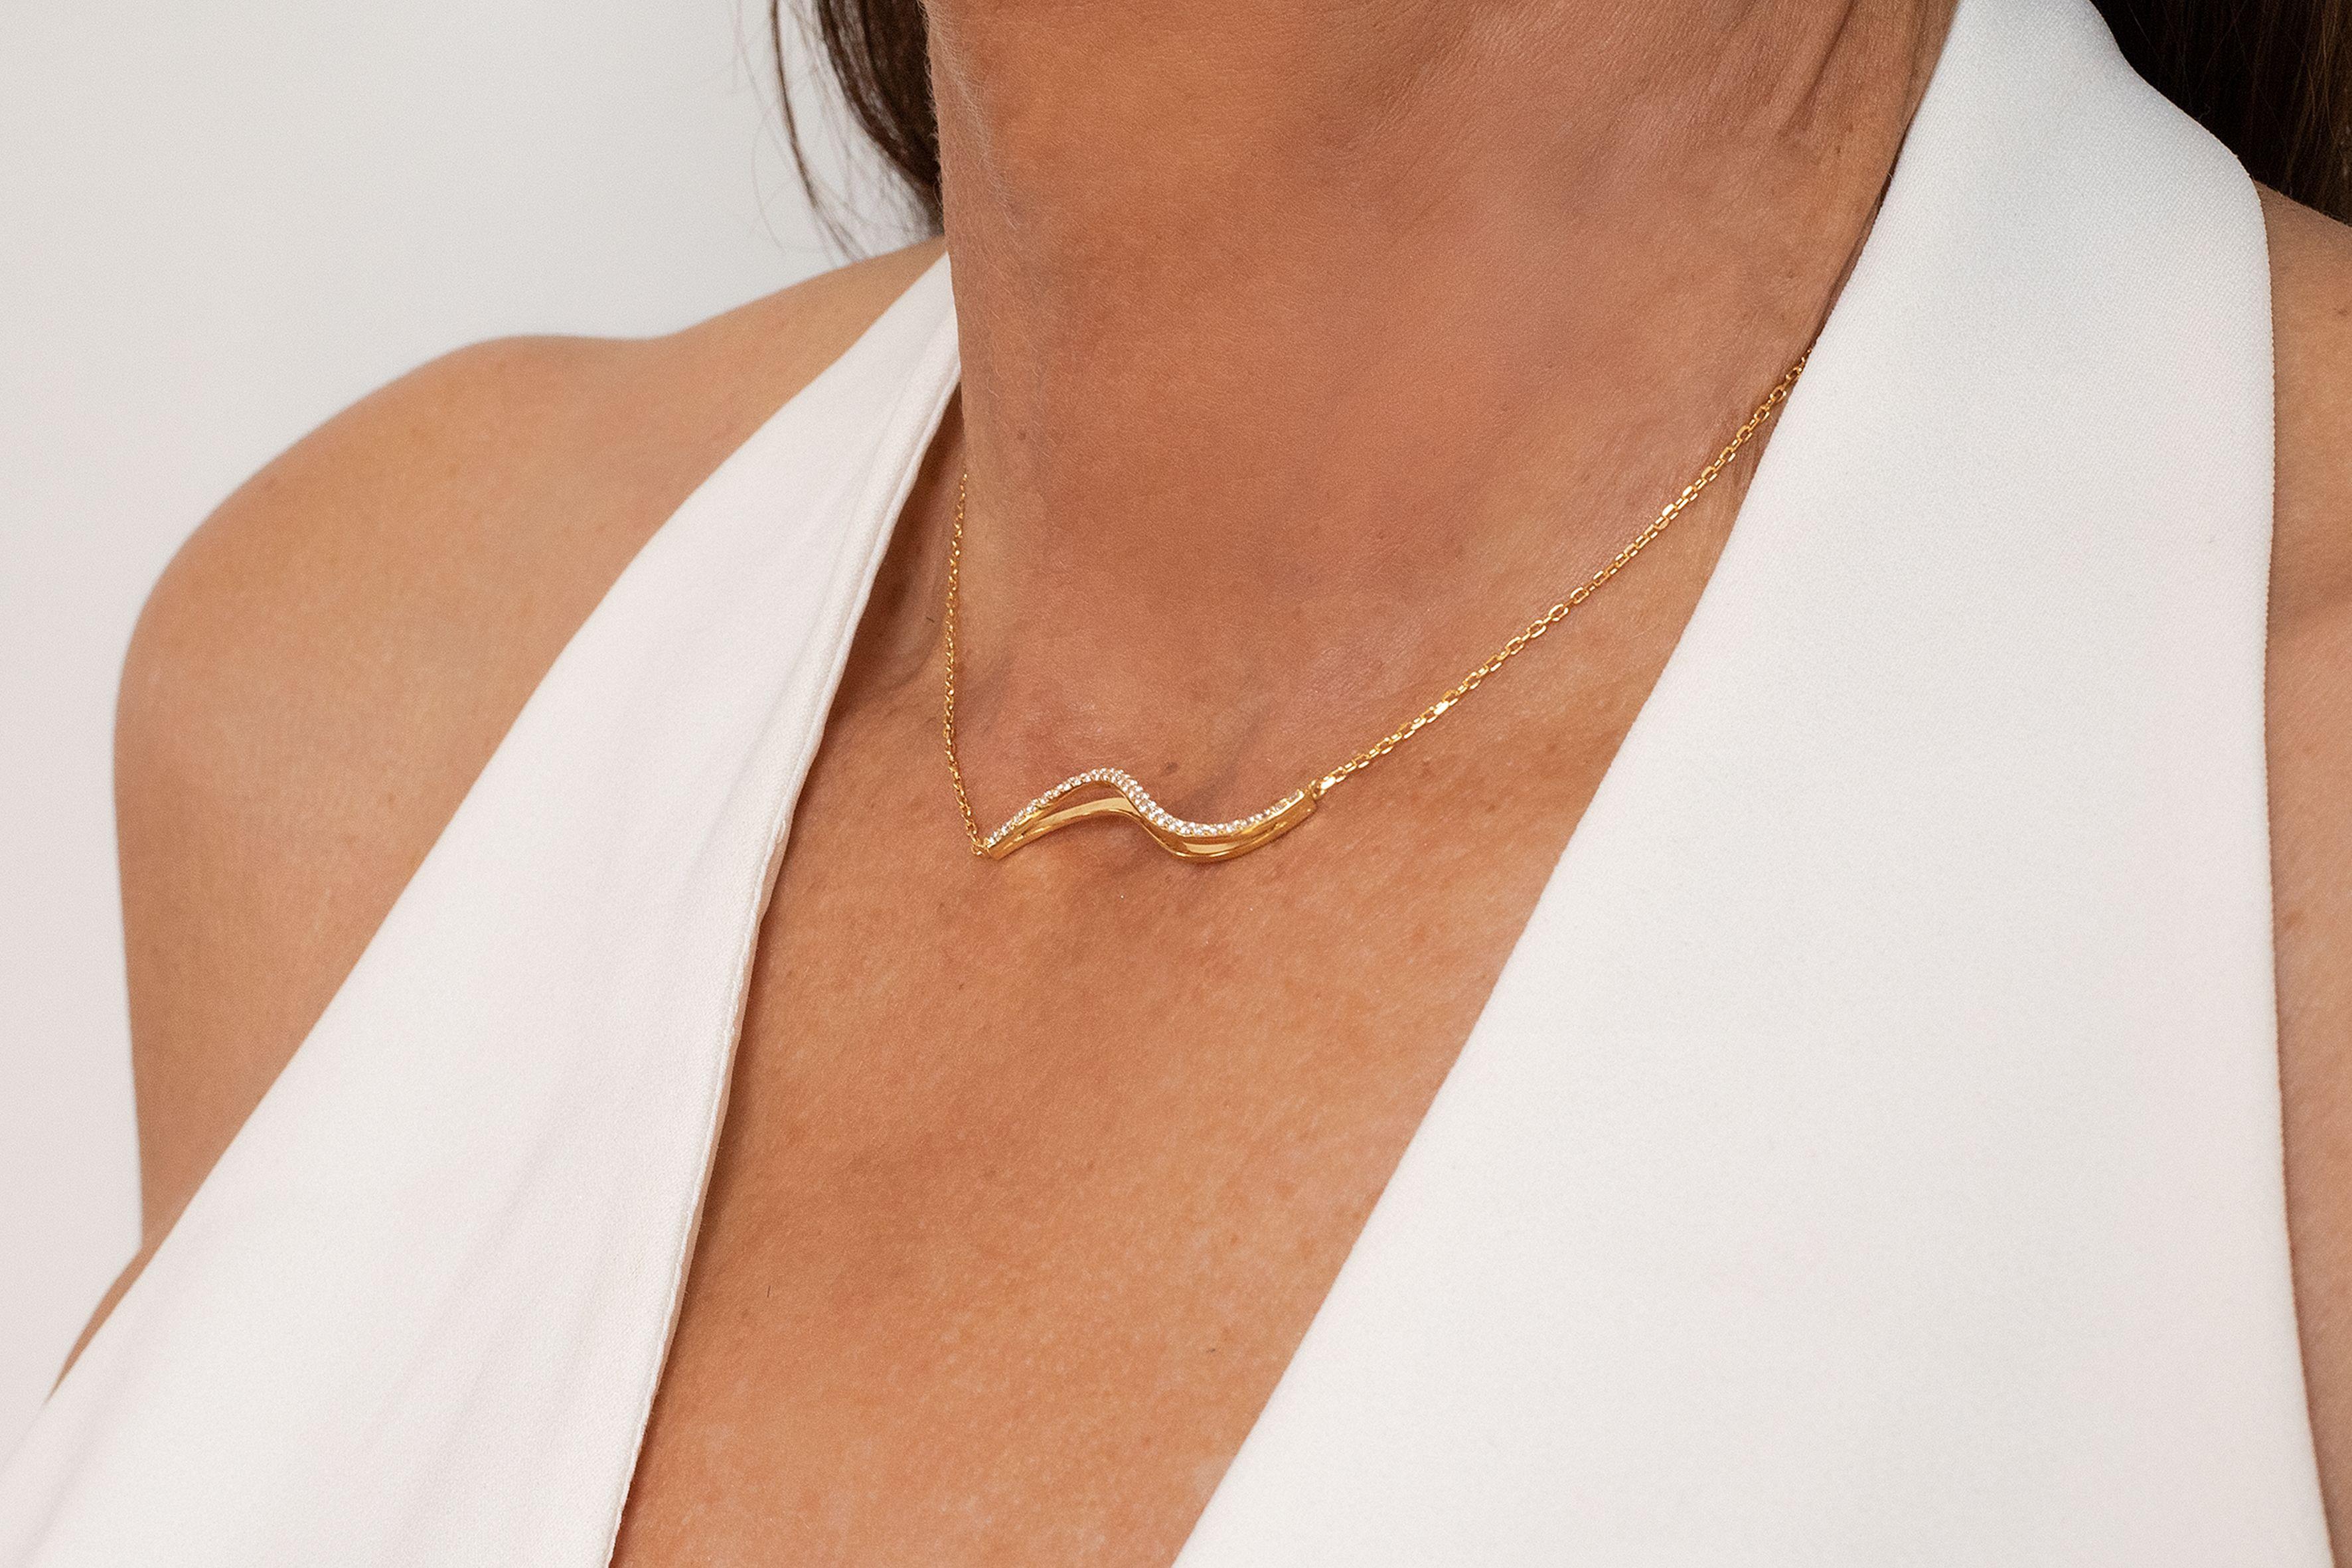 The Waves jewelry collection is an expression of elegance and beauty inspired by the smooth curves and molding of the sea, the waves that dance and move with grace. Each piece is meticulously crafted to capture the fluid, captivating essence of the